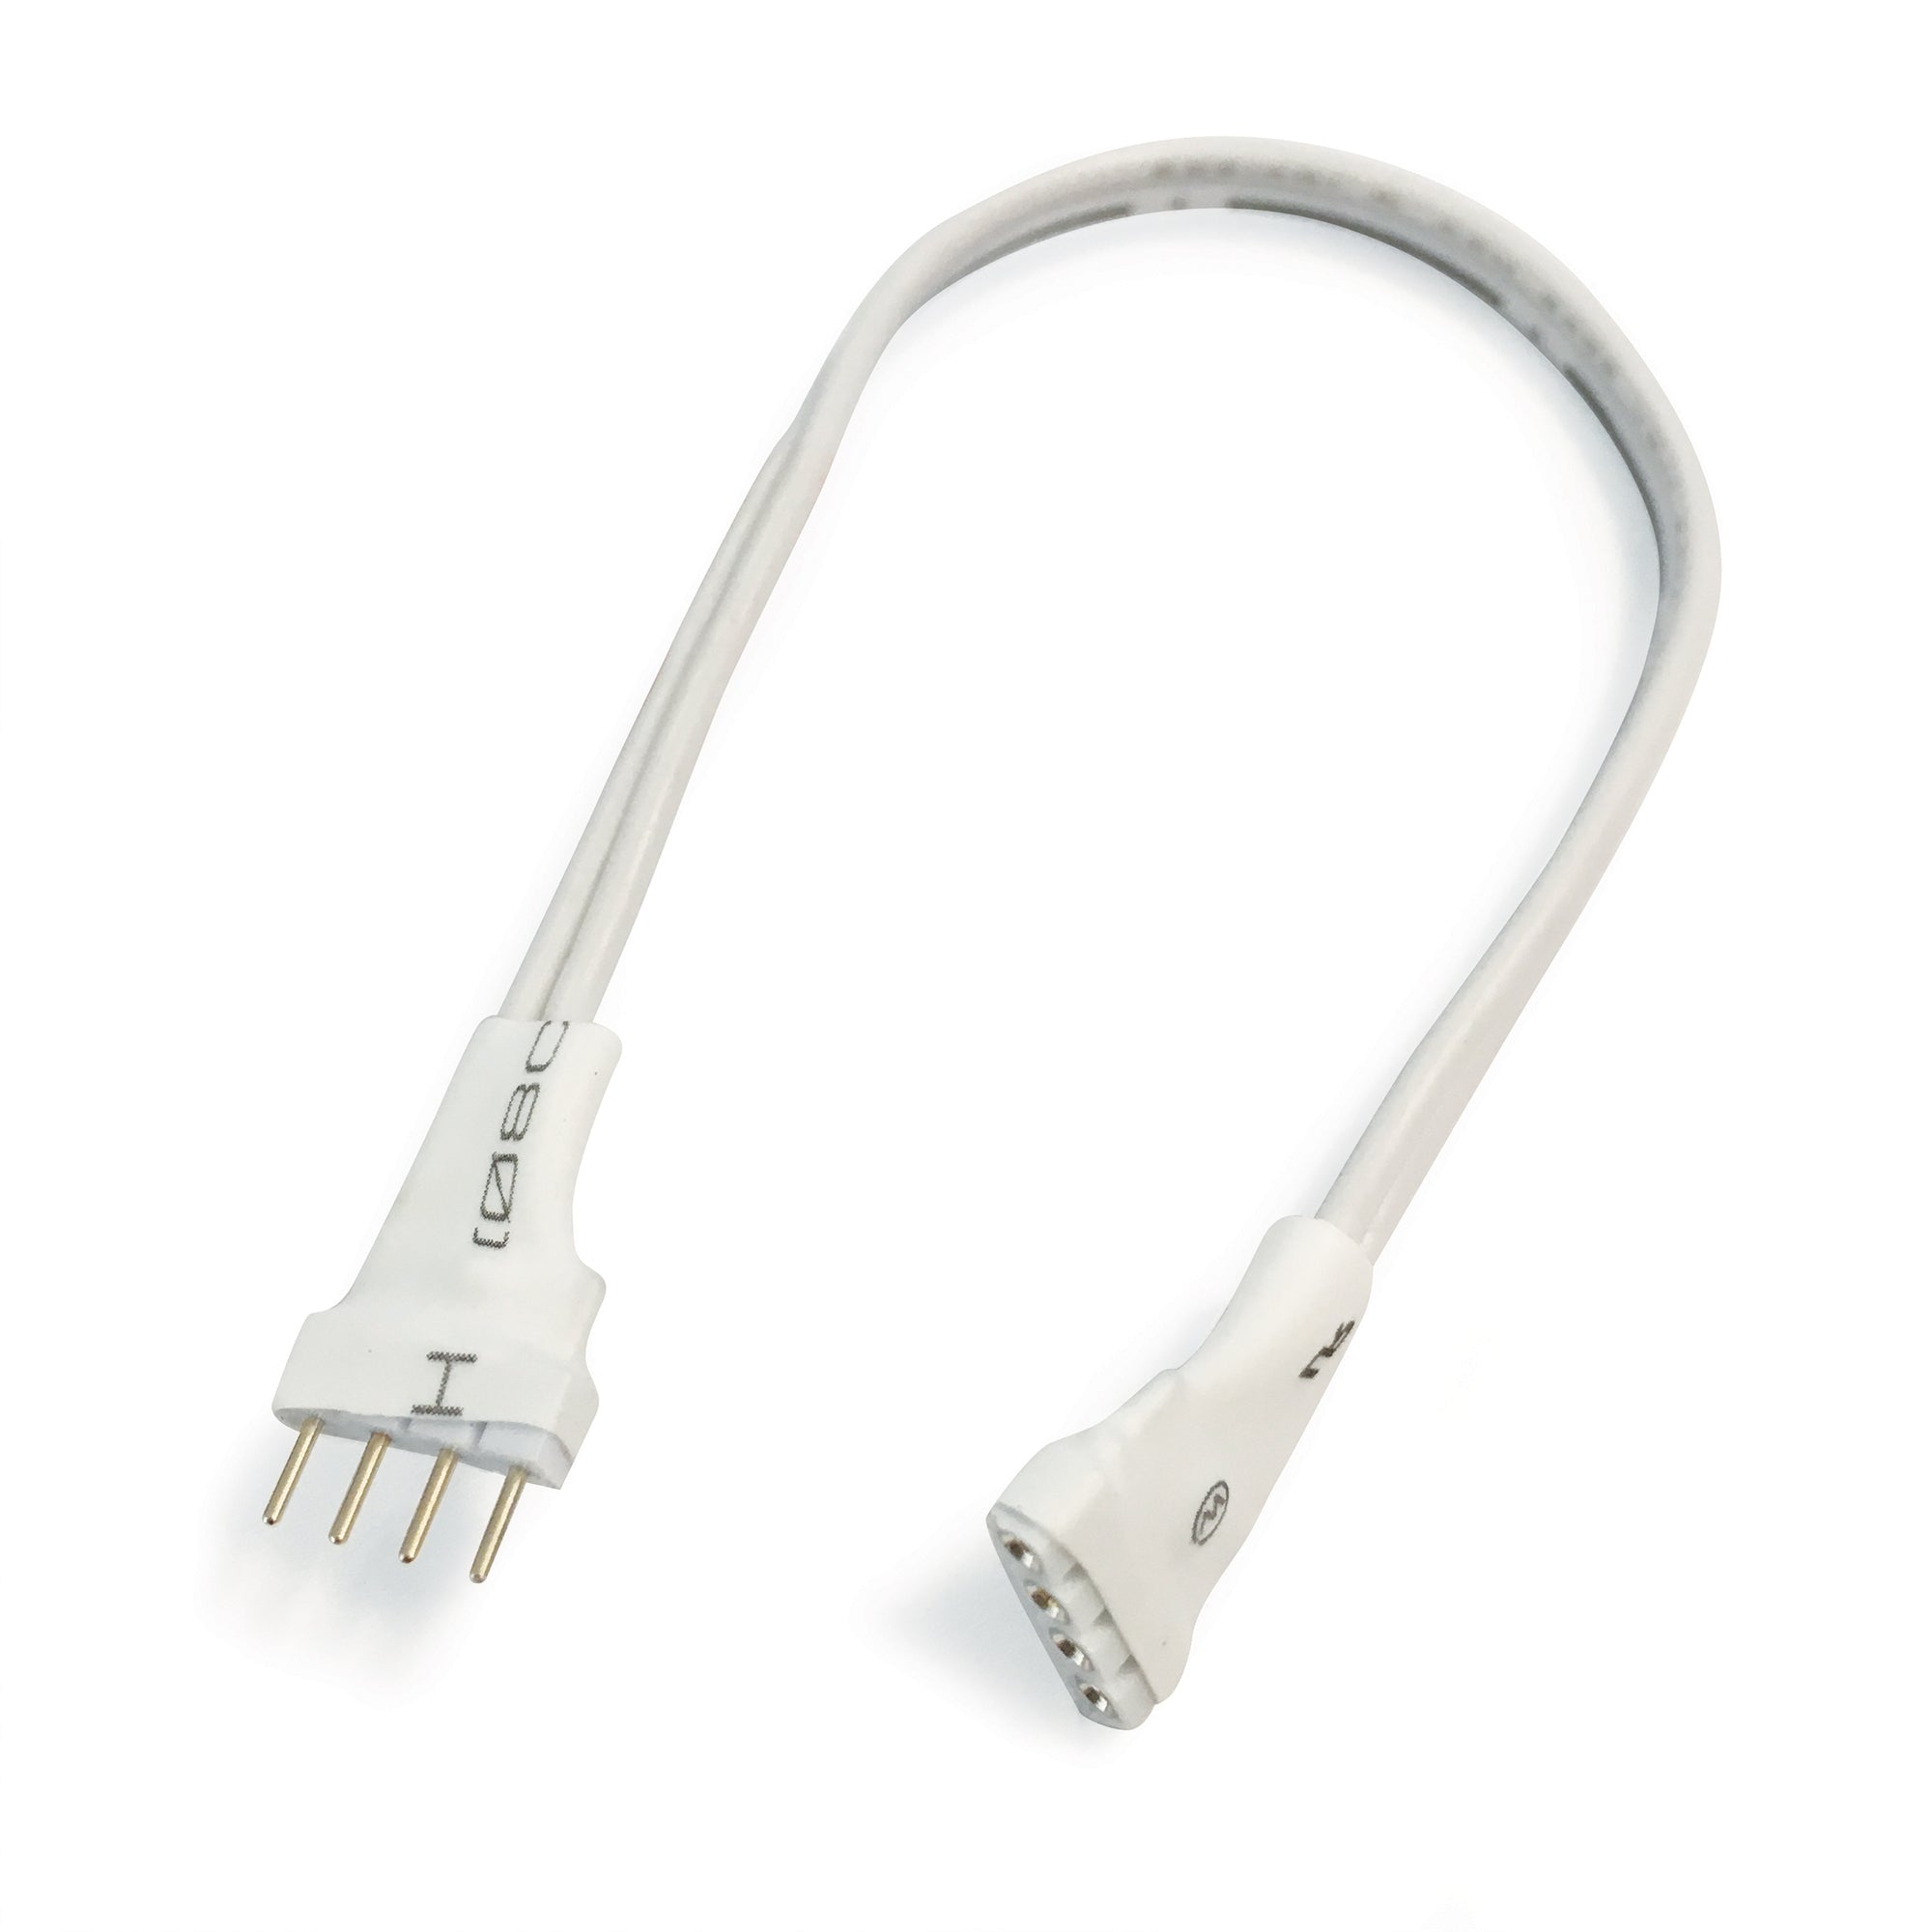 Nora Lighting NATL-218W - Accent / Undercabinet - 18 Inch Interconnection Cable for Standard & Side-Lit Tape Light, White